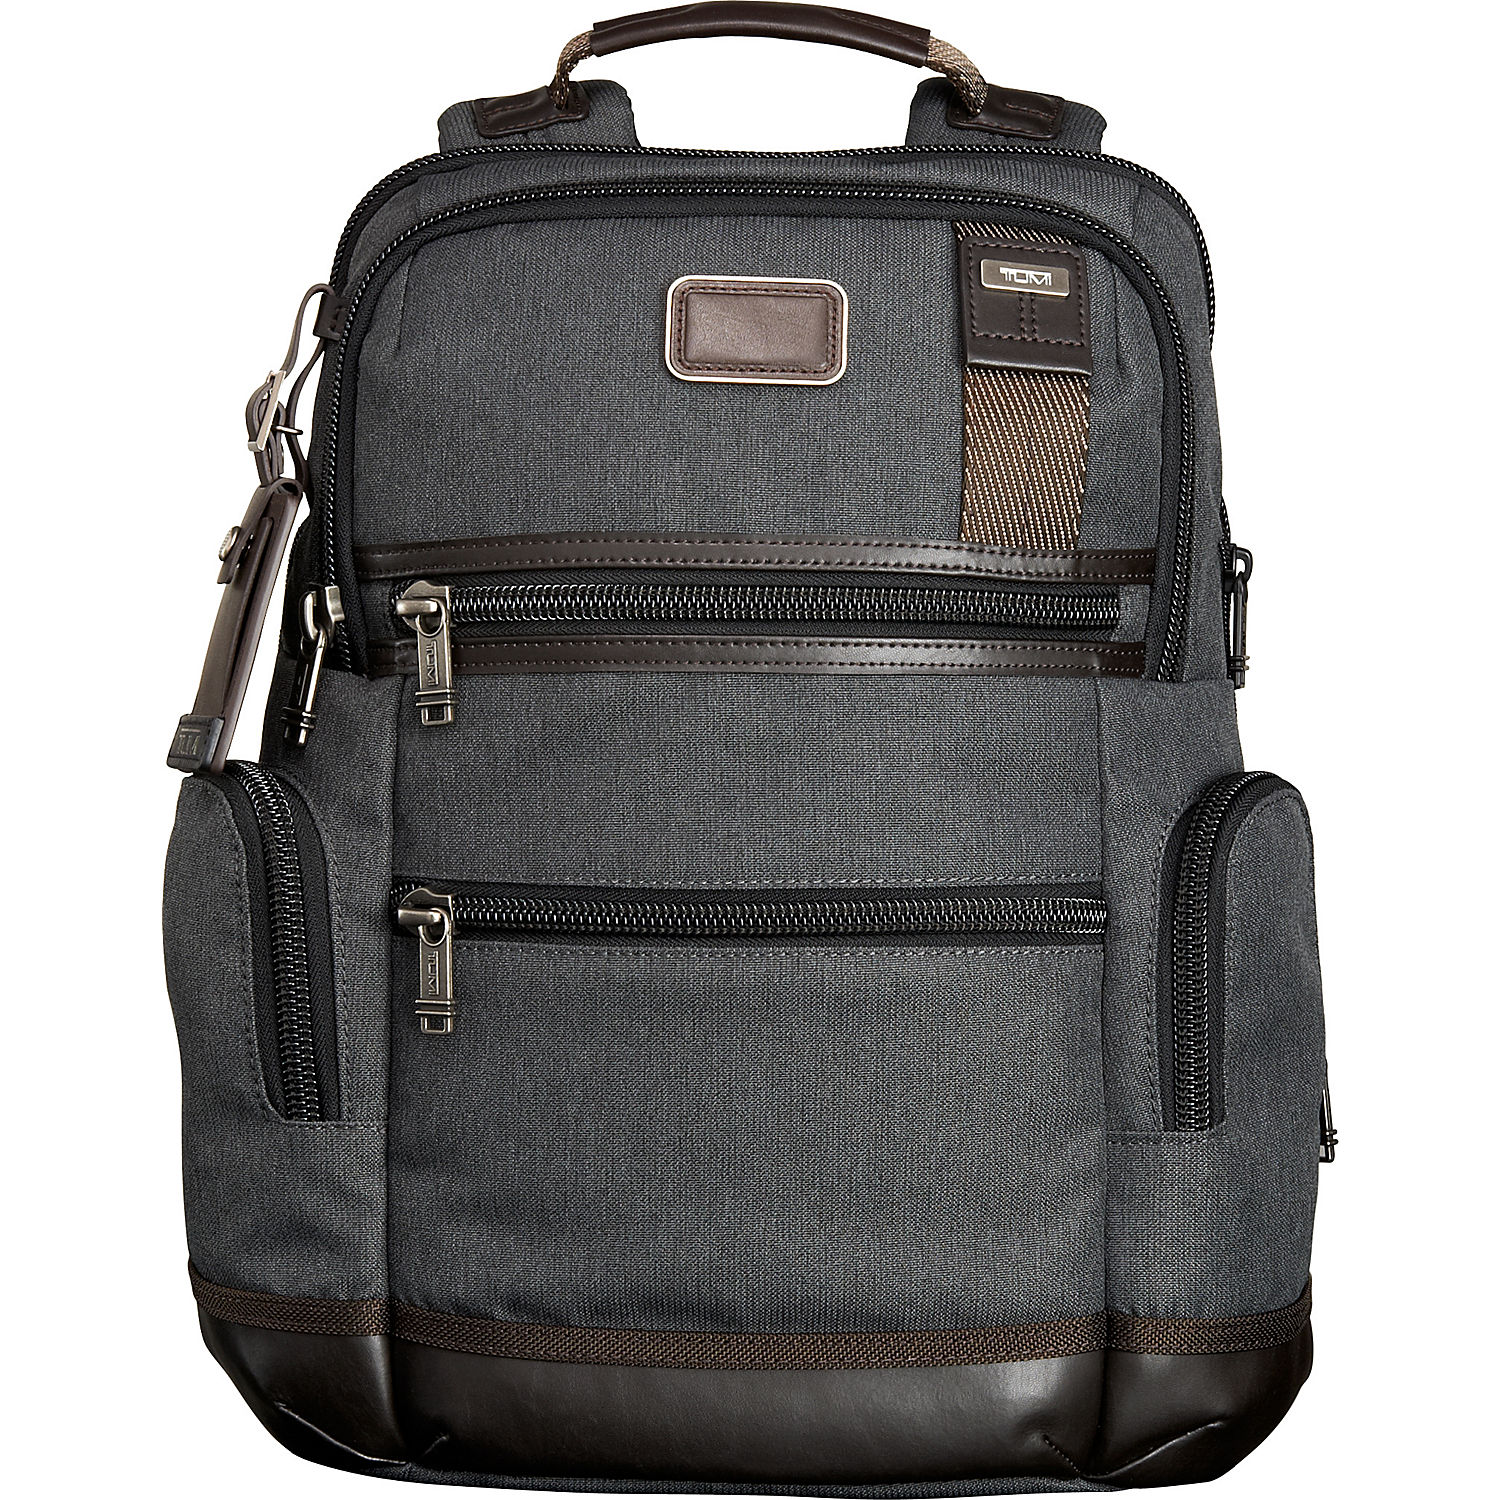 Tumi Backpack Purse. TUMI Just In Case Backpack - Small Packable Travel